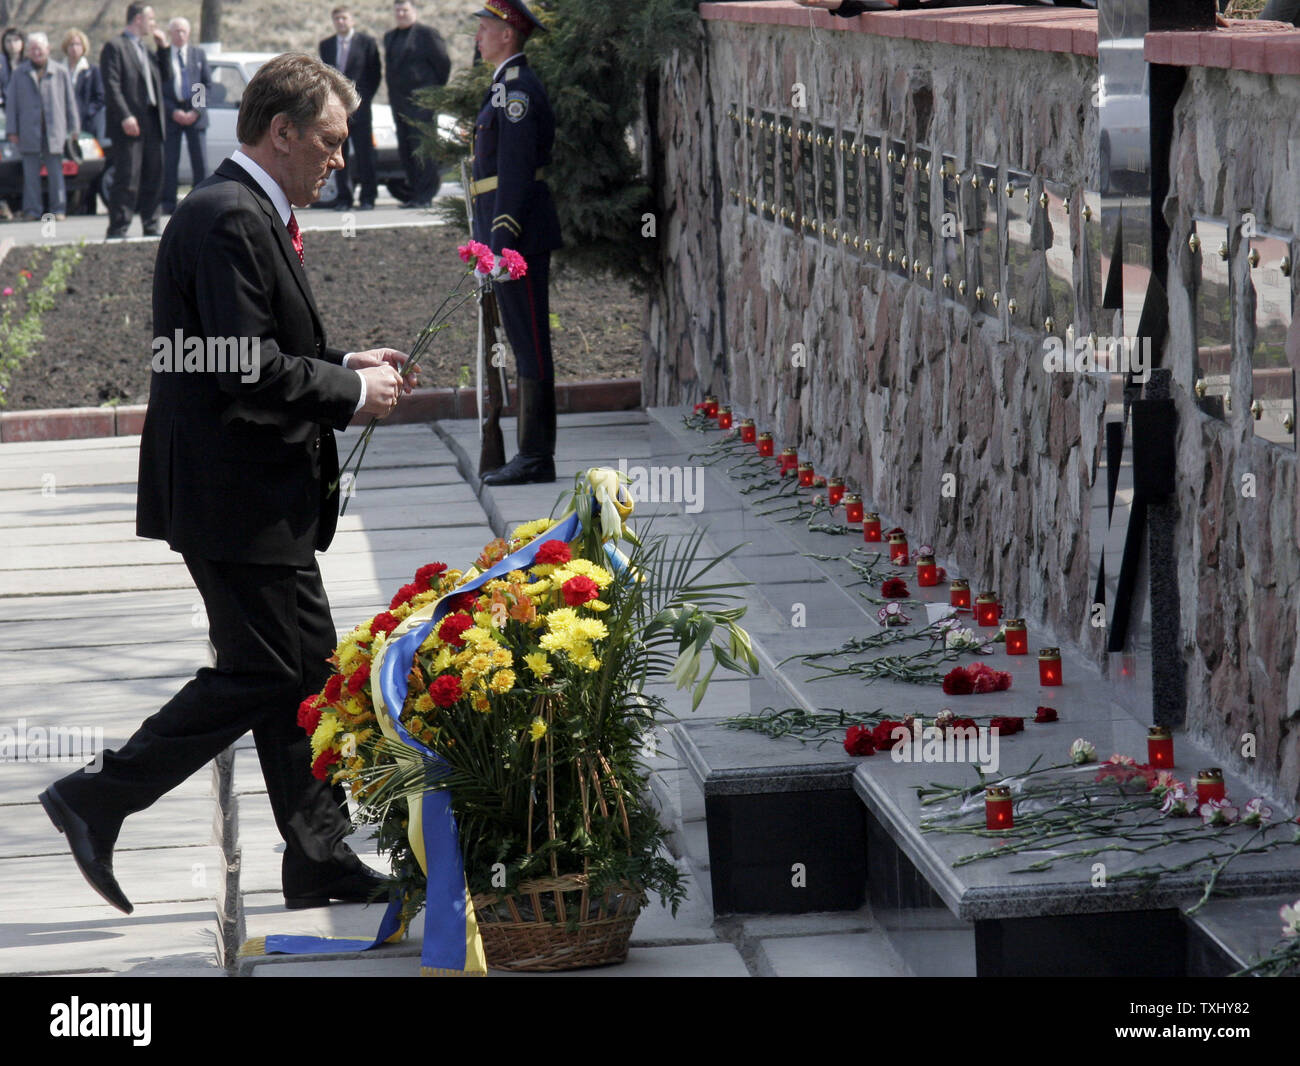 Ukrainian President Viktor Yushchenko lays flowers at a memorial monument of Chernobyl victims during the commemoration rally for those who died during and after  the Chernobyl nuclear disaster near the Chernobyl nuclear plant April 26, 2006. Today Ukraine marks the 20th anniversary of the Chernobyl nuclear disaster, when the fourth reactor at the Chernobyl plant exploded, spreading a radioactive cloud across the former Soviet Union. (UPI Photo/Sergey Starostenko) Stock Photo